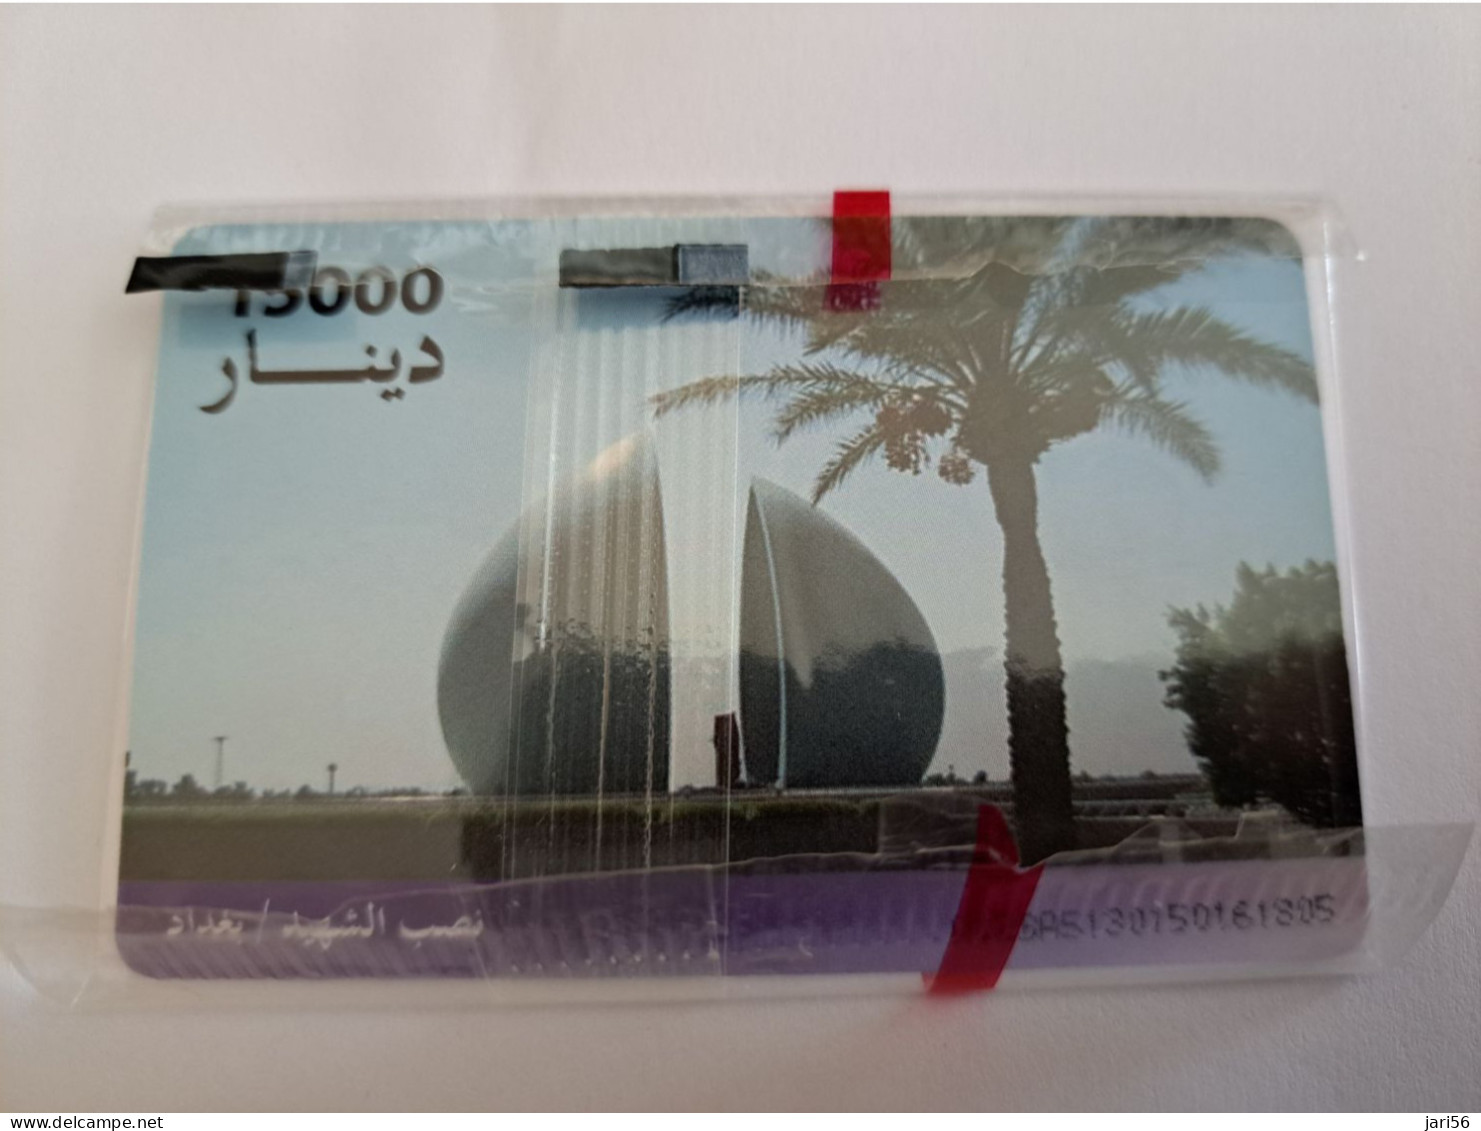 IRAK  CHIPCARD 15000 UNITS  ITPC  BUILDING WITH PALMTREE     MINT IN WRAPPER   **13802** - Iraq